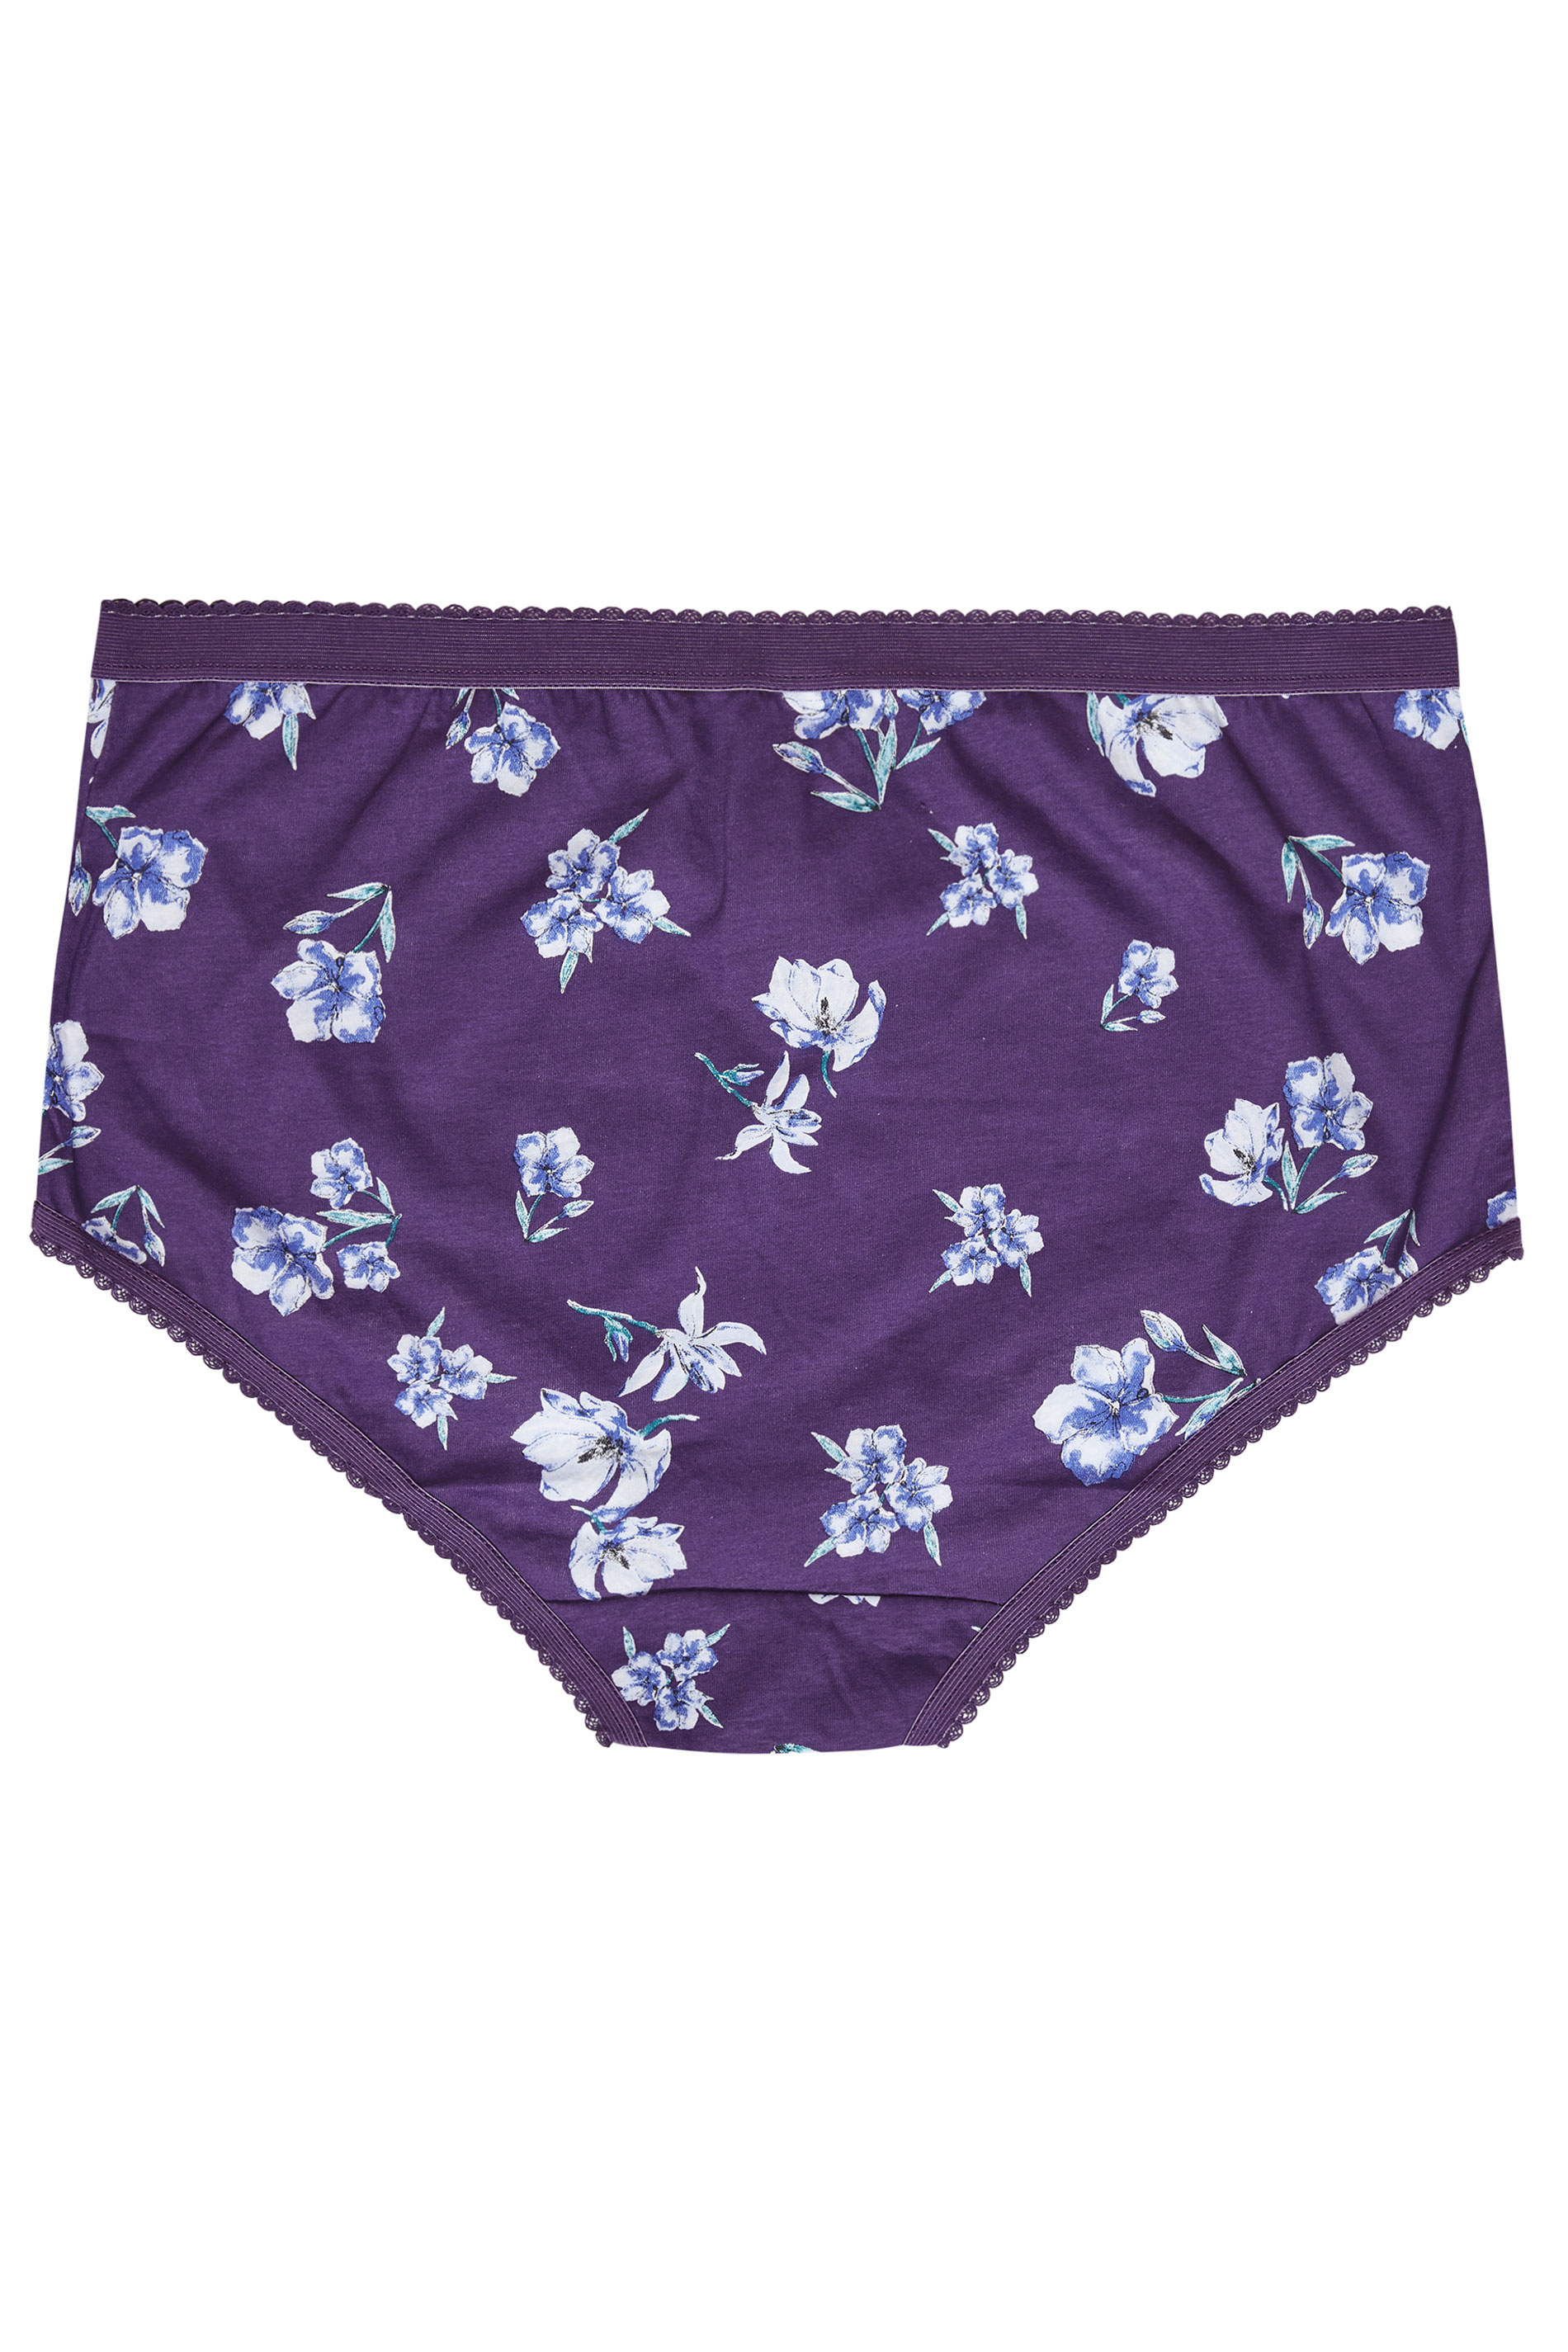 5 PACK Purple Floral Cotton Full Briefs | Yours Clothing